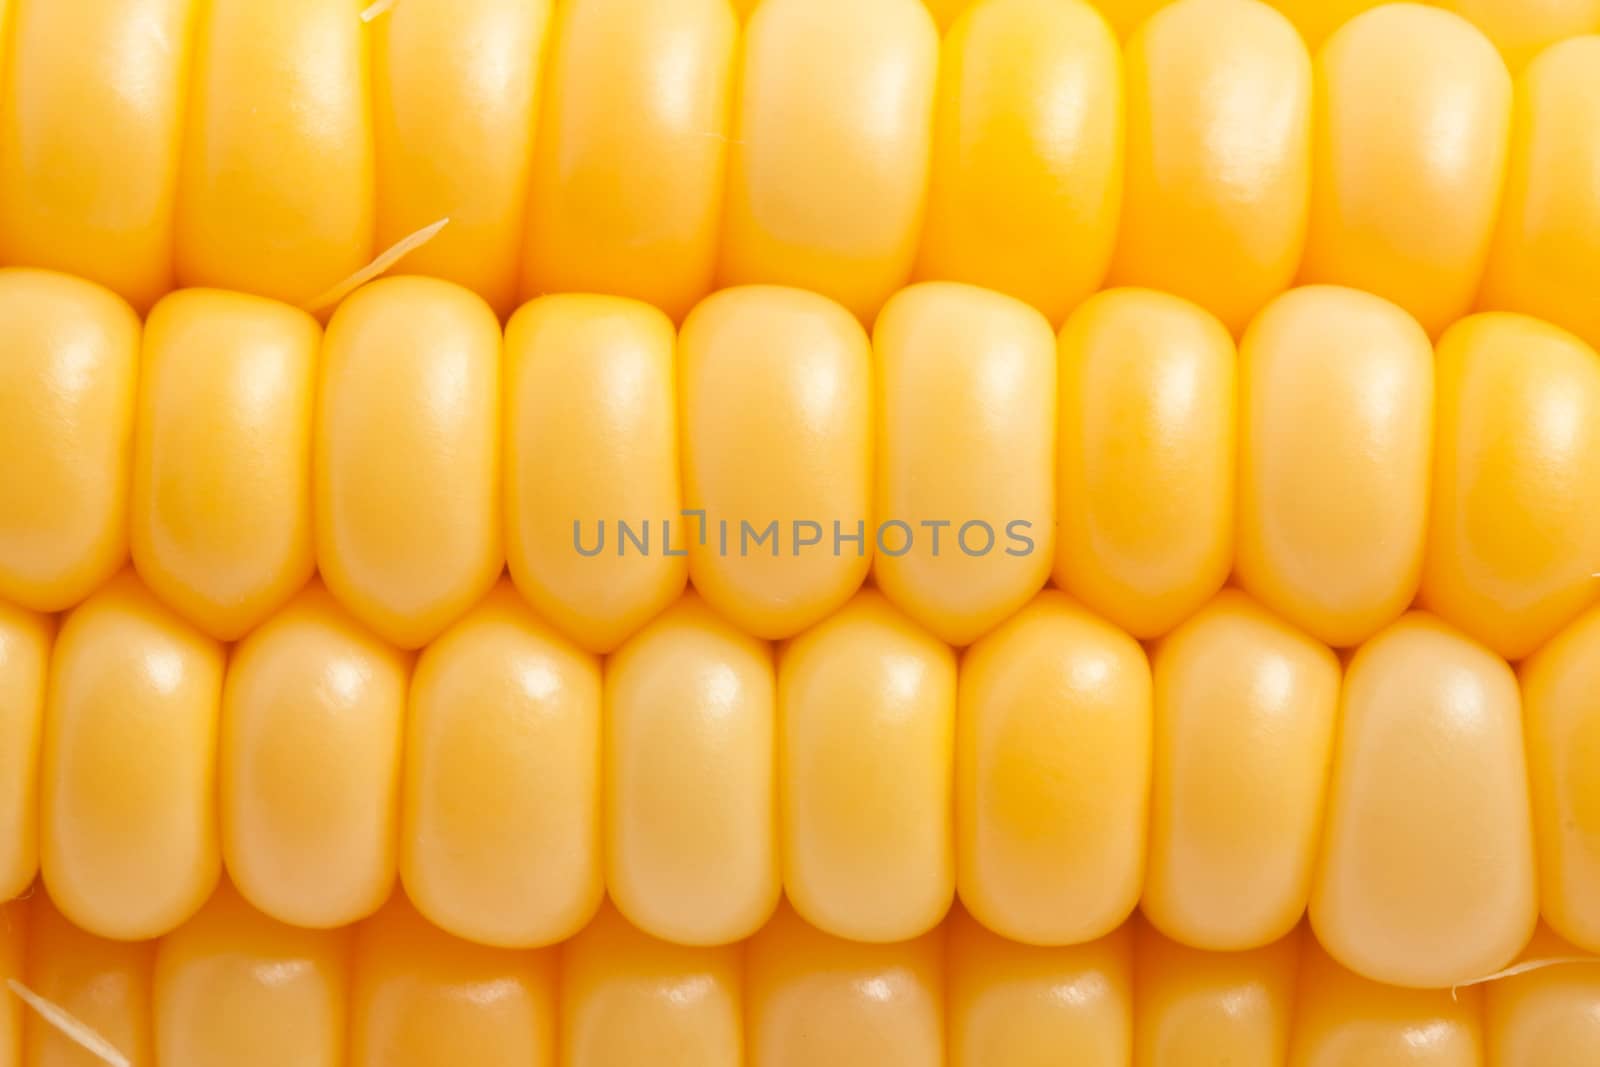 Macro photo of yellow corn background, healthy and tasty food